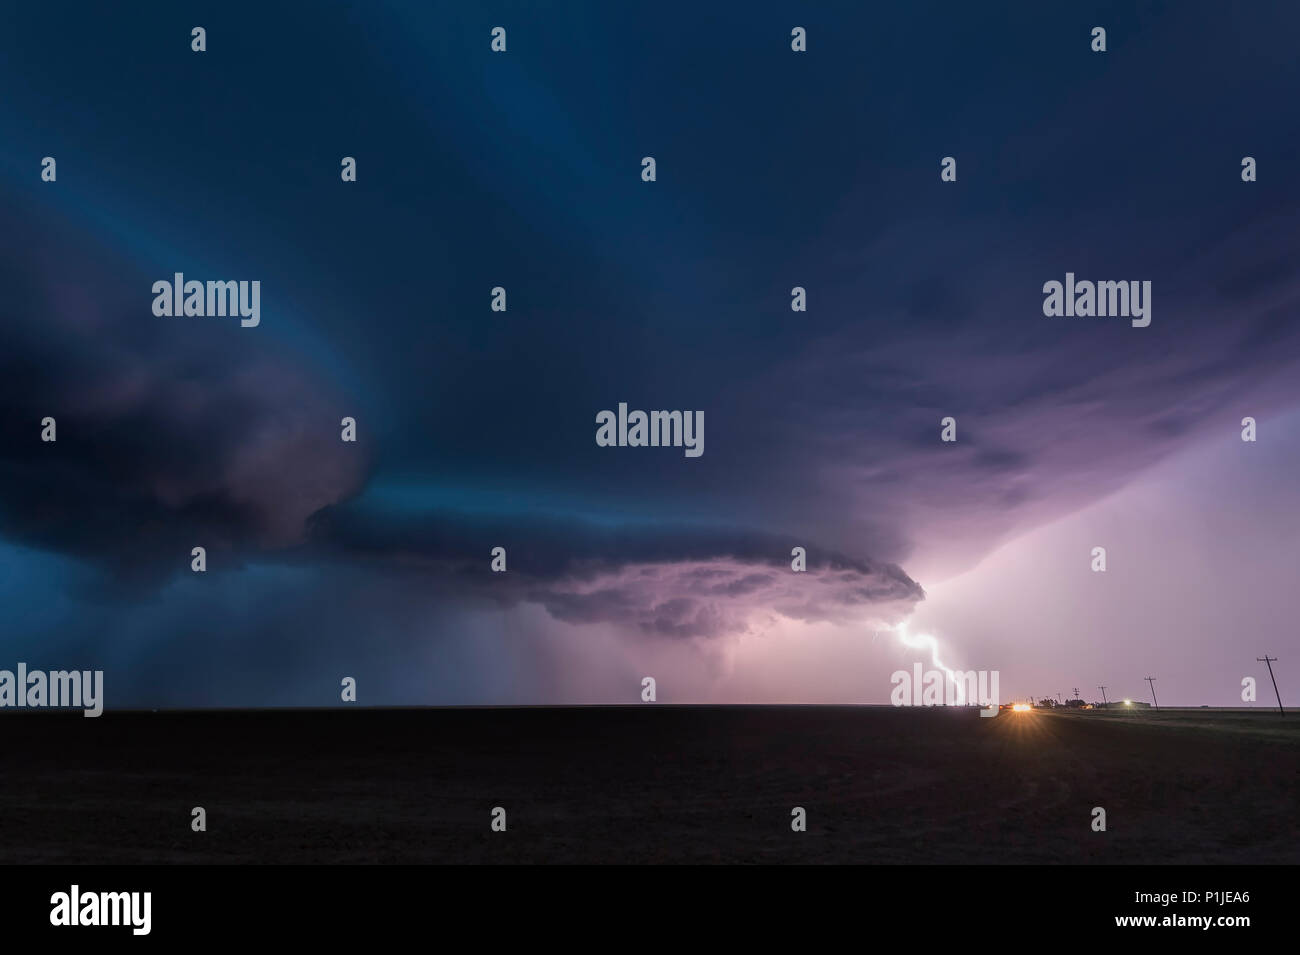 Thunderstorm with low cloud base and lightning at night close to Amarillo, Texas, USA Stock Photo